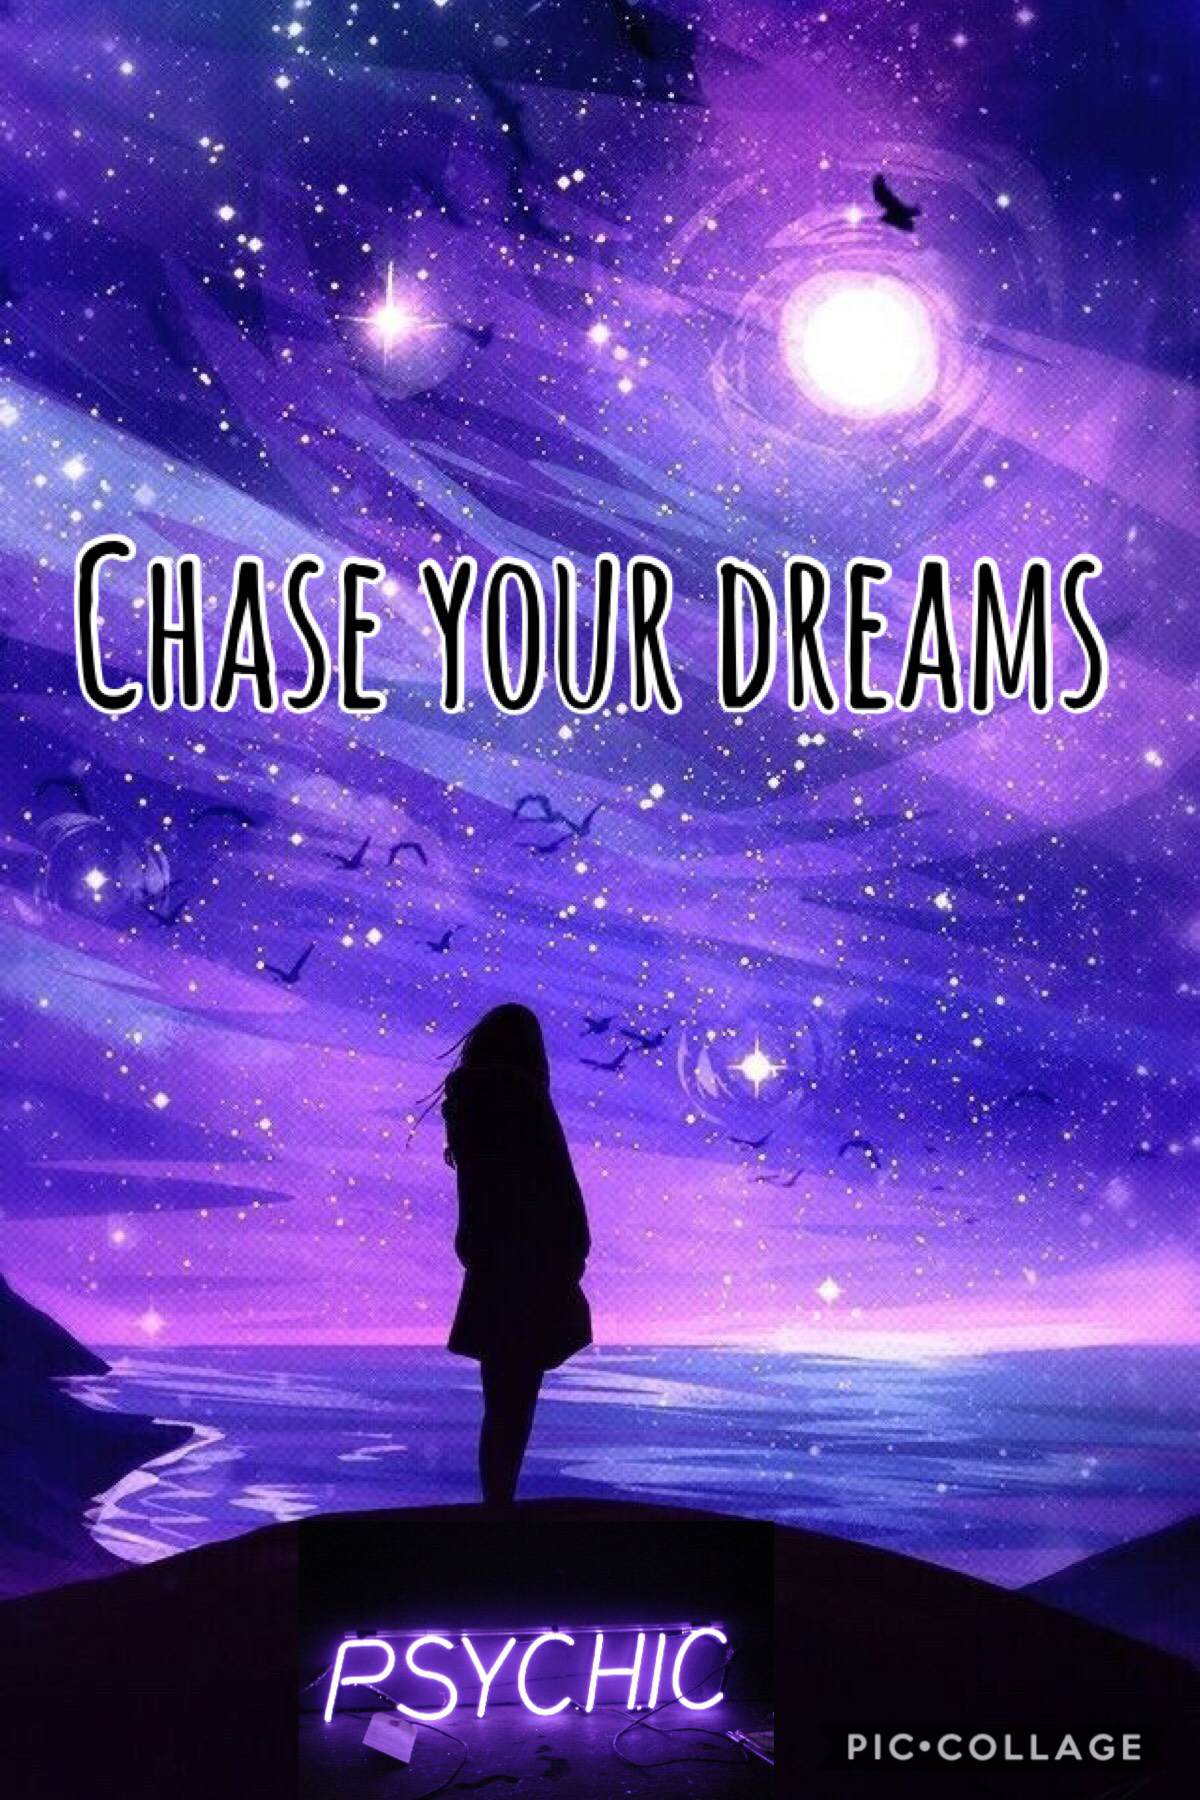 Chase your dreams 